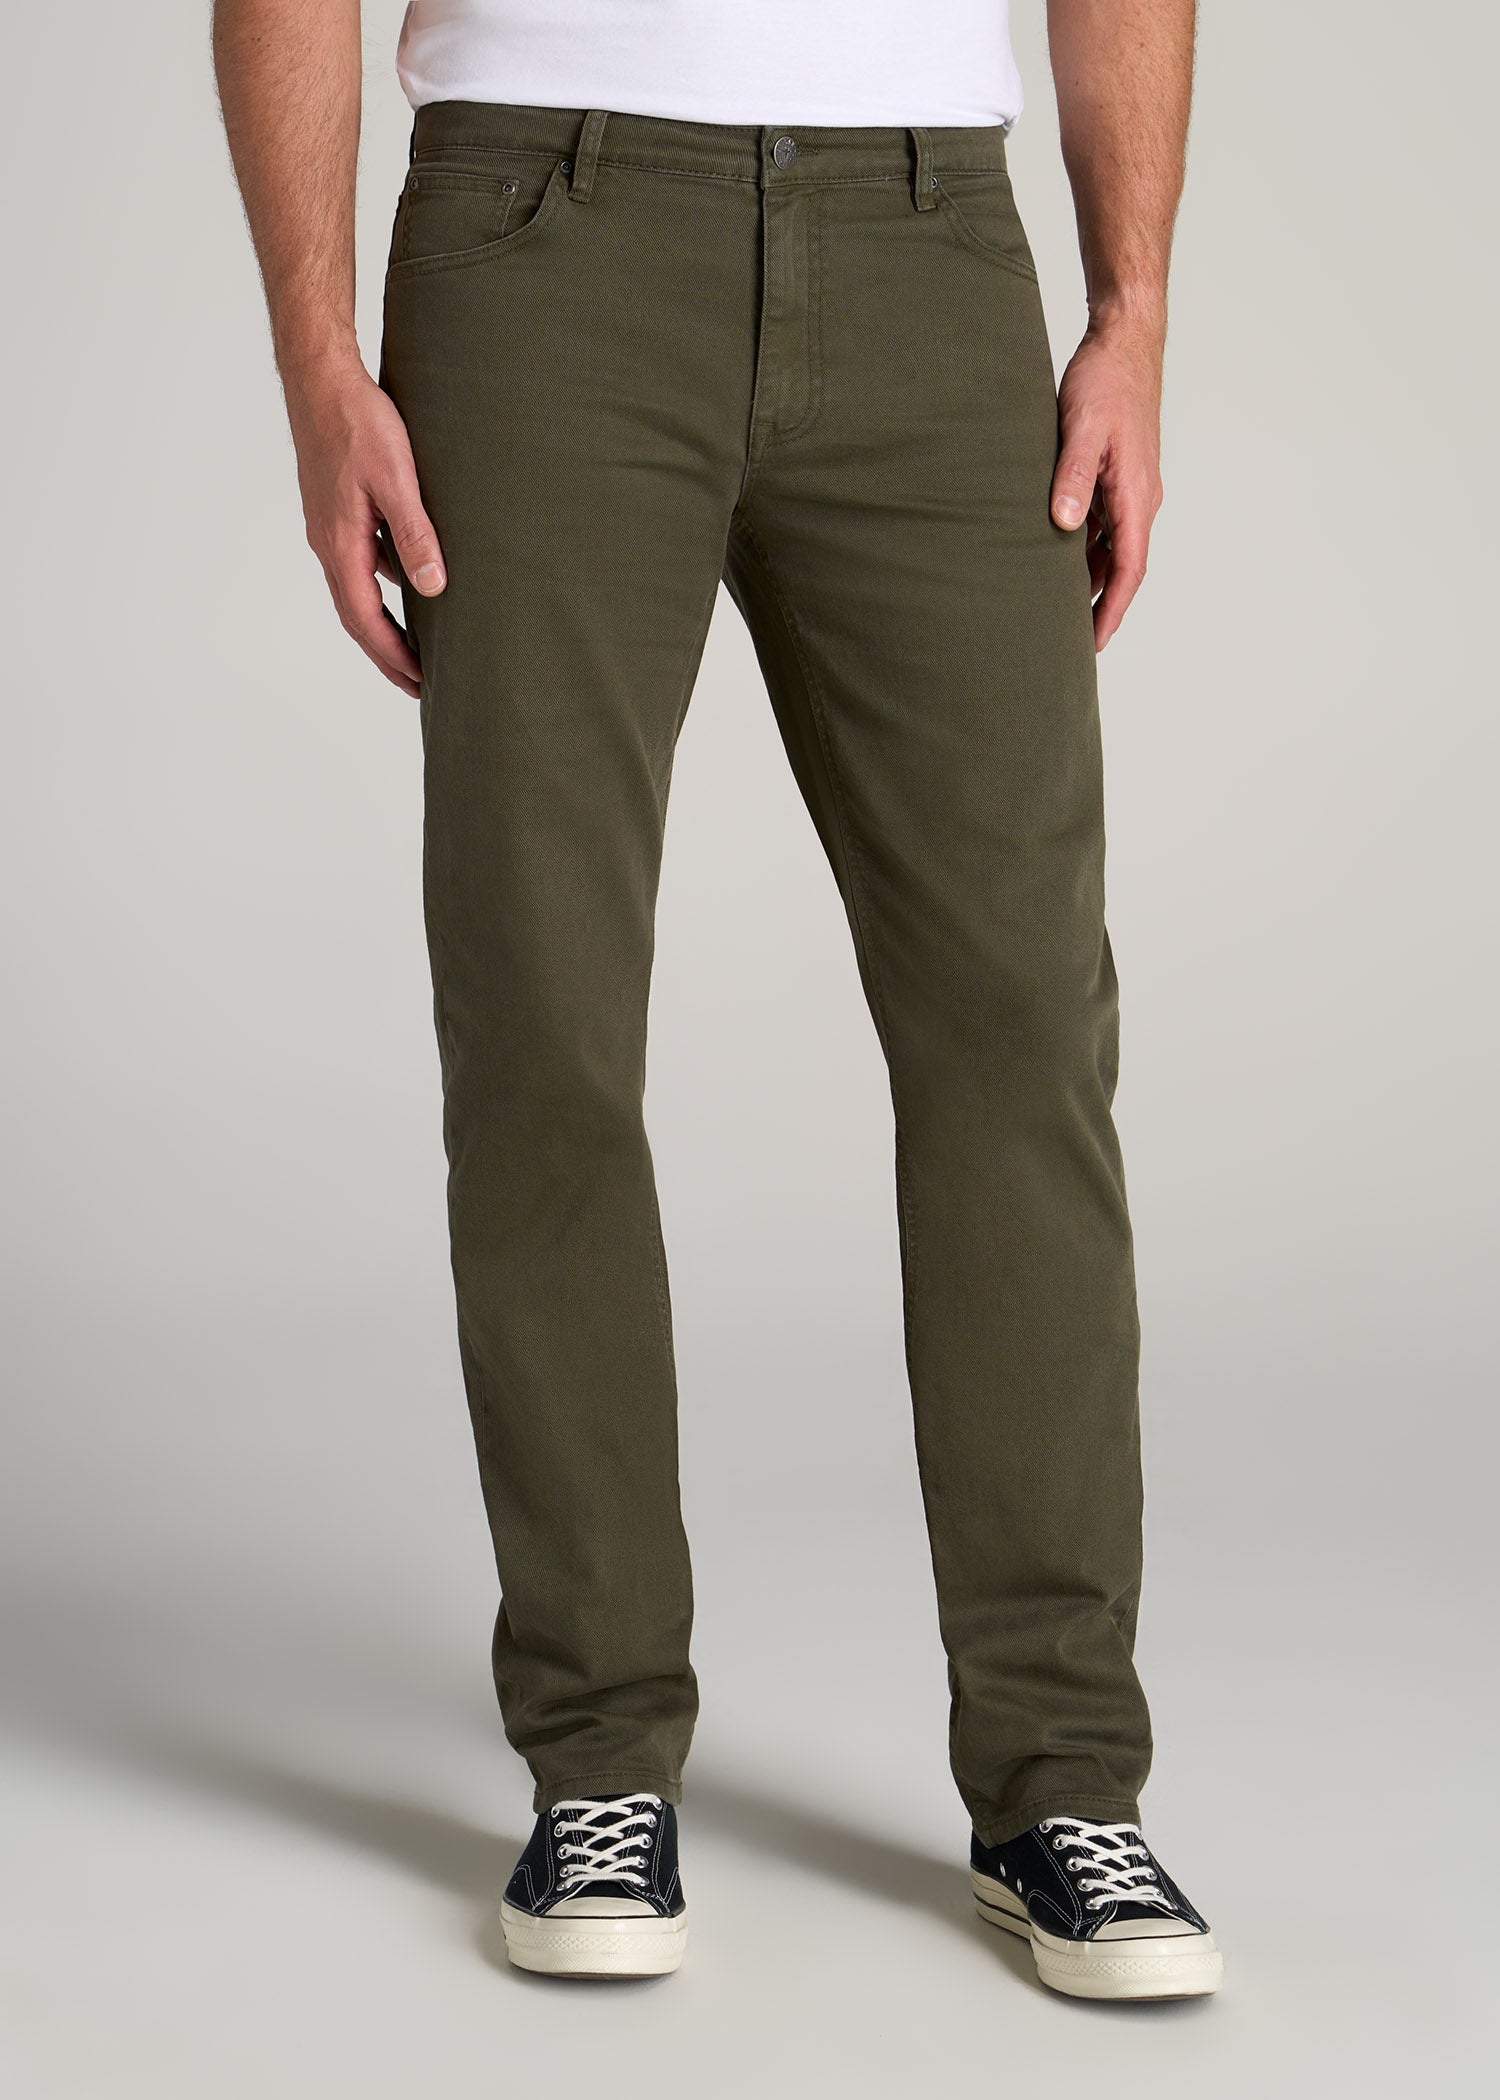    American-Tall-Men-J1-Jeans-Olive-Green-Wash-front